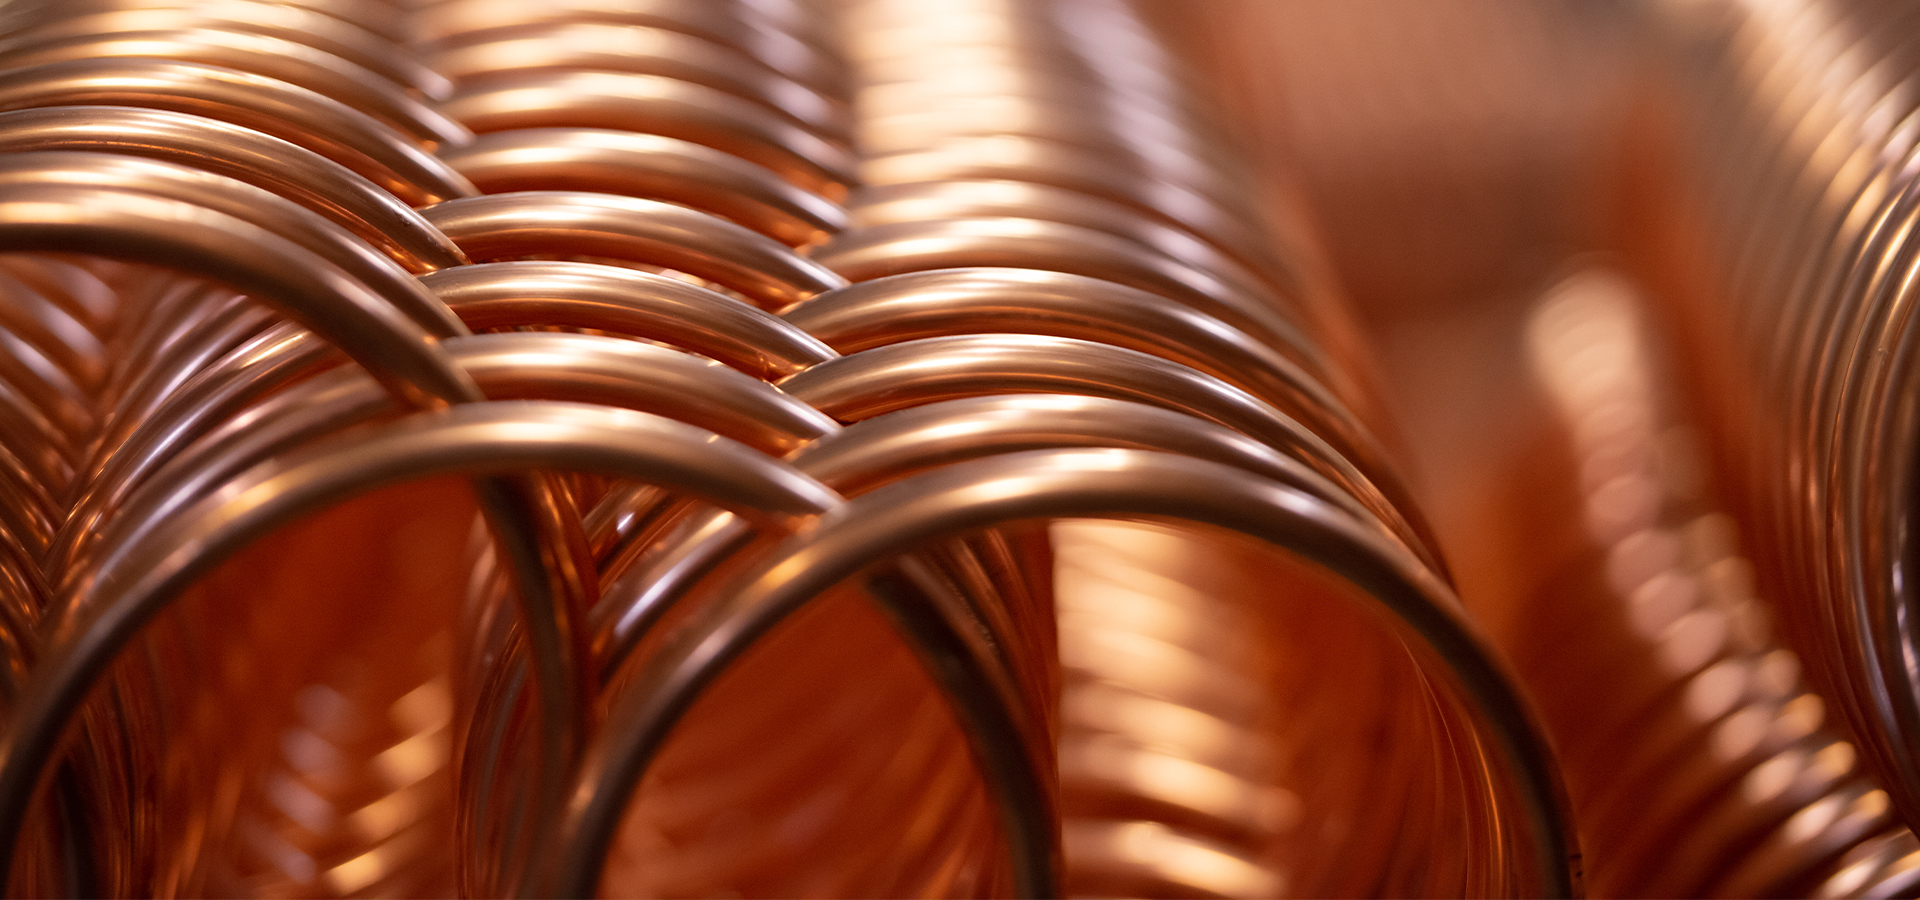 Copper coils used in Thermo 2000's indirect water heaters